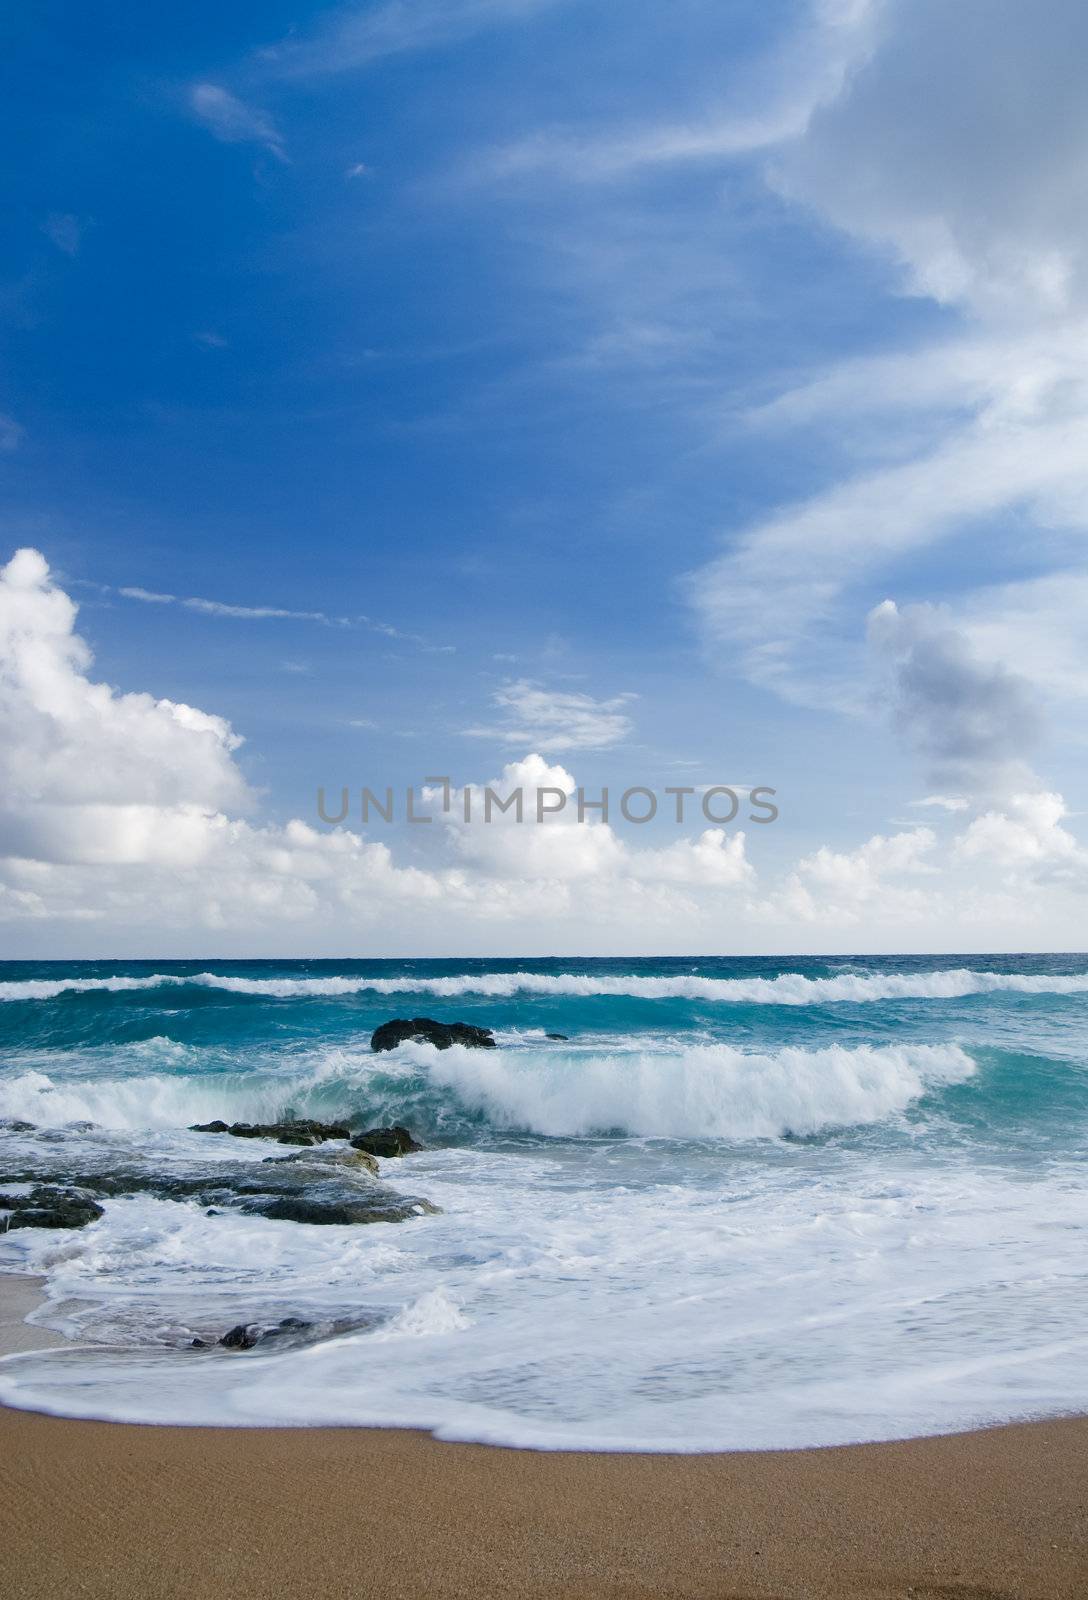 It is a beautiful beach with big waves in kenting of Taiwan.